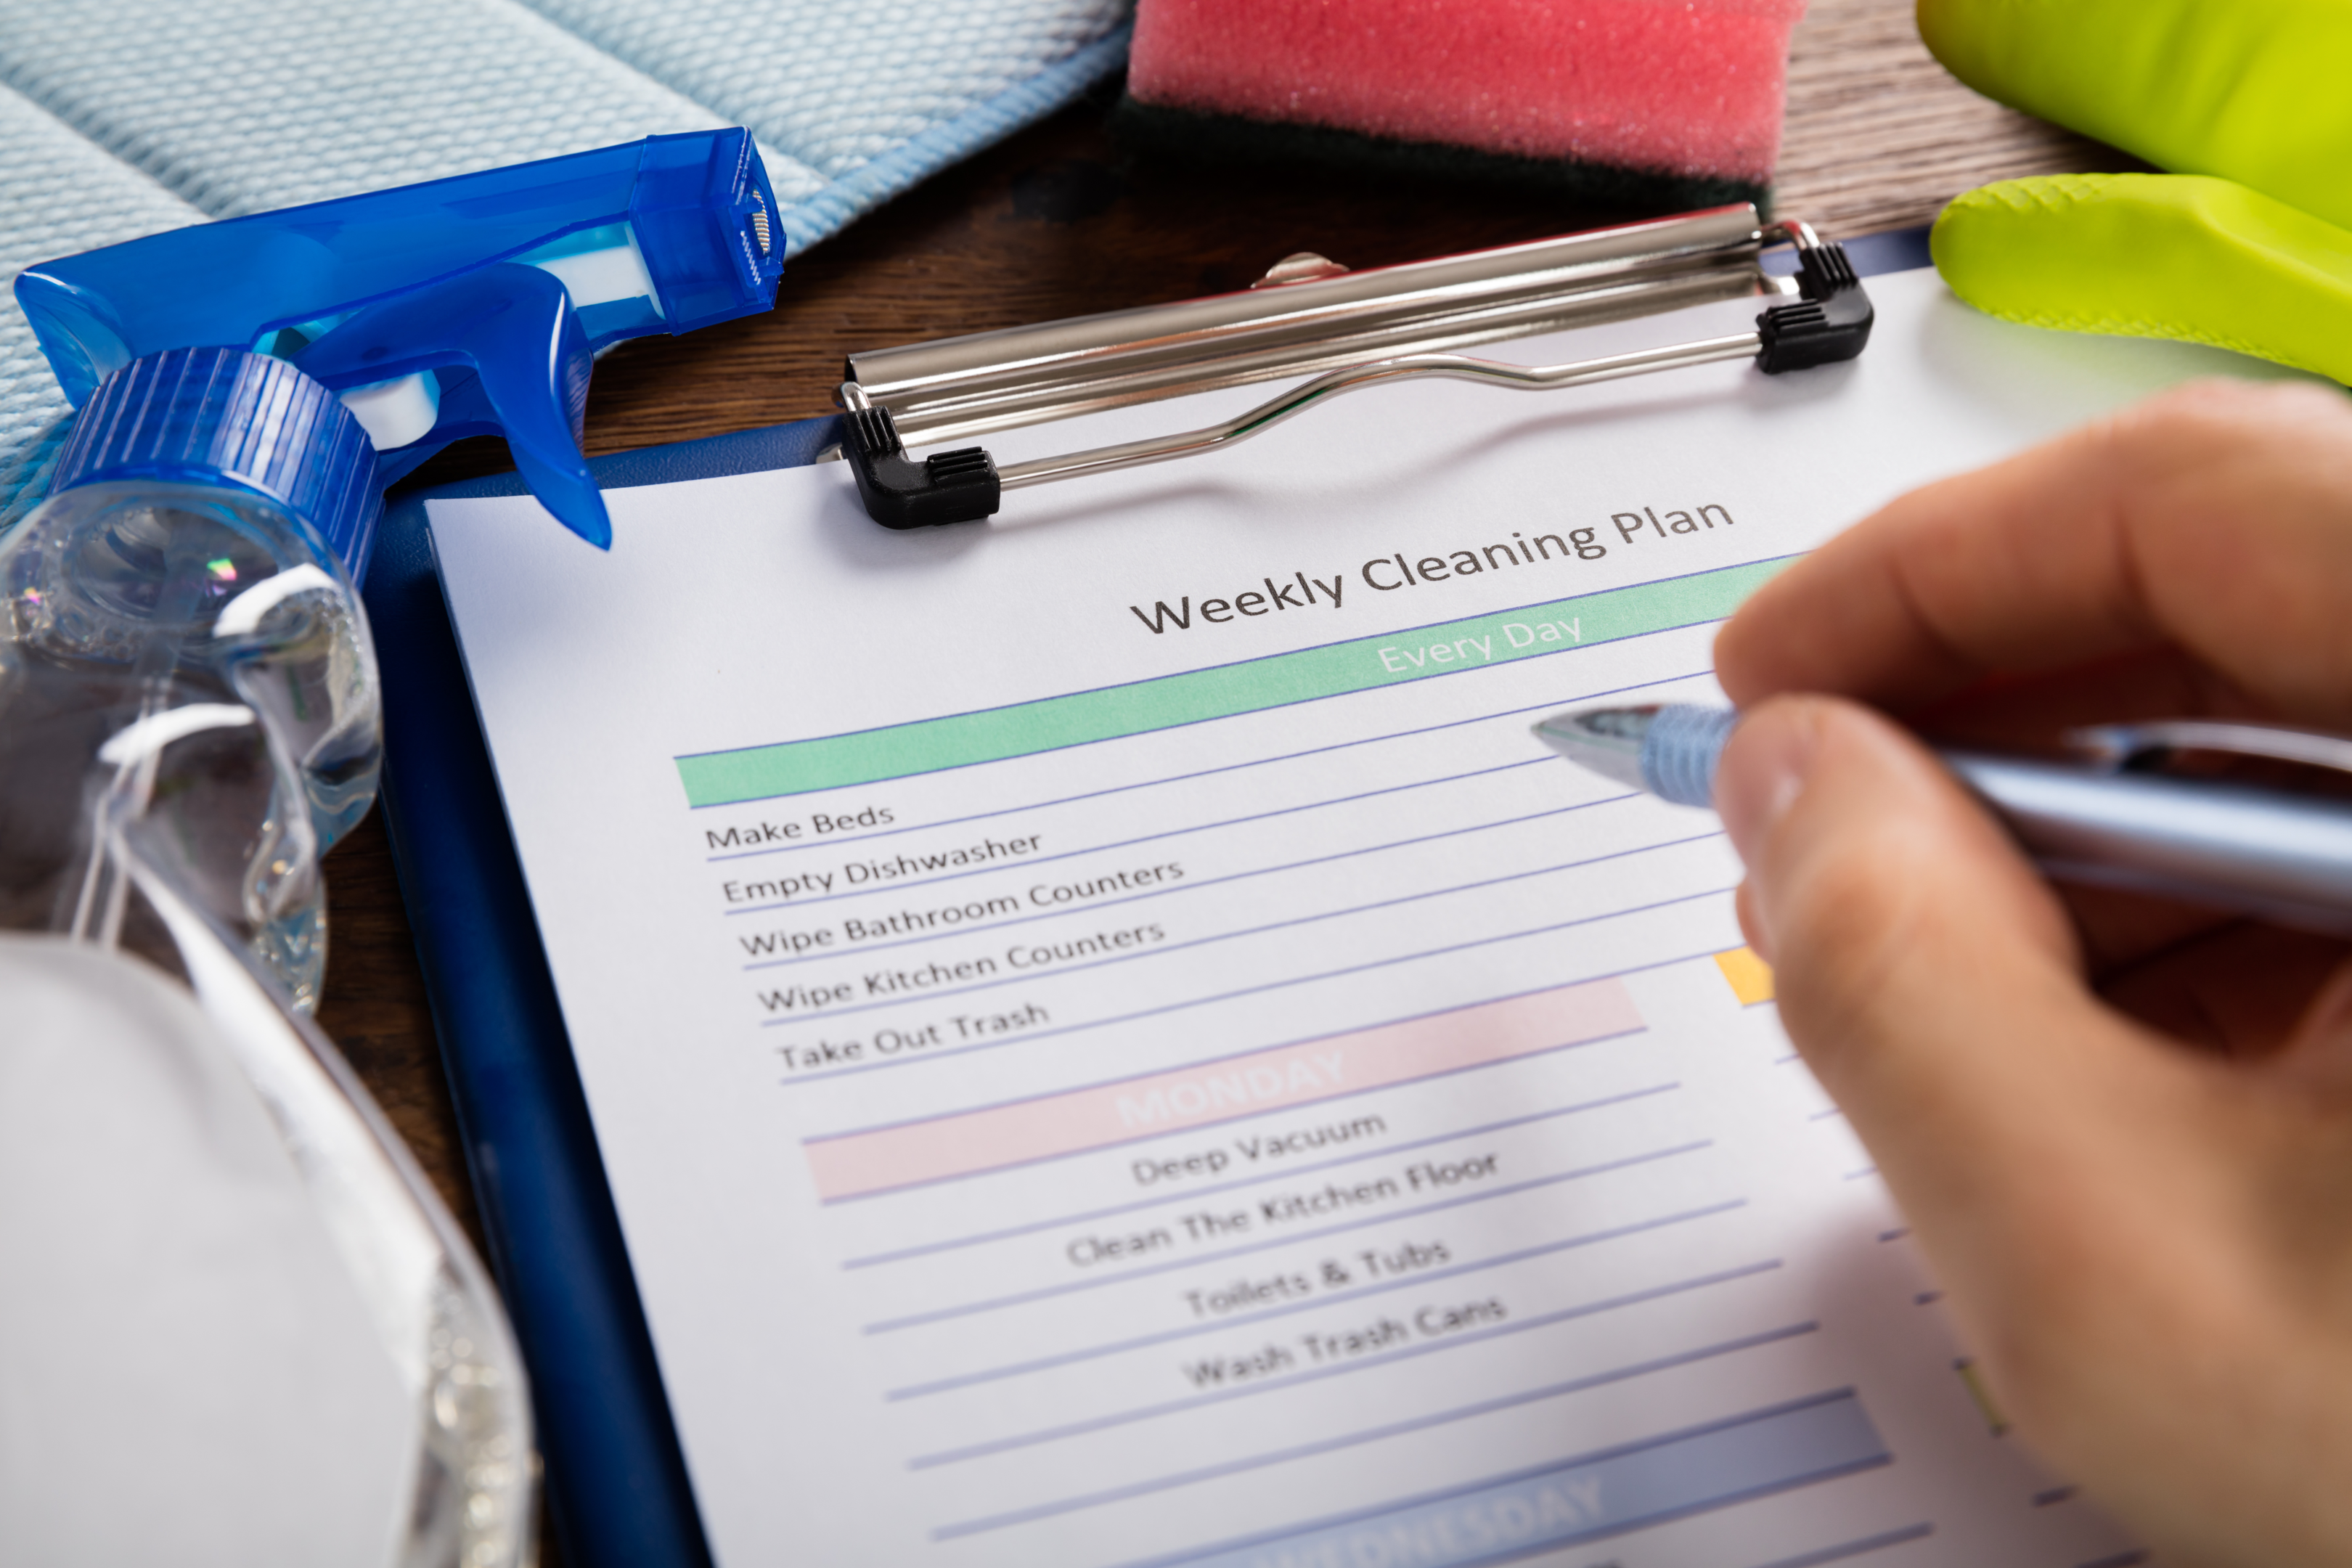 Photo by: AdobeStock/ Weekly Cleaning Plan for your home.